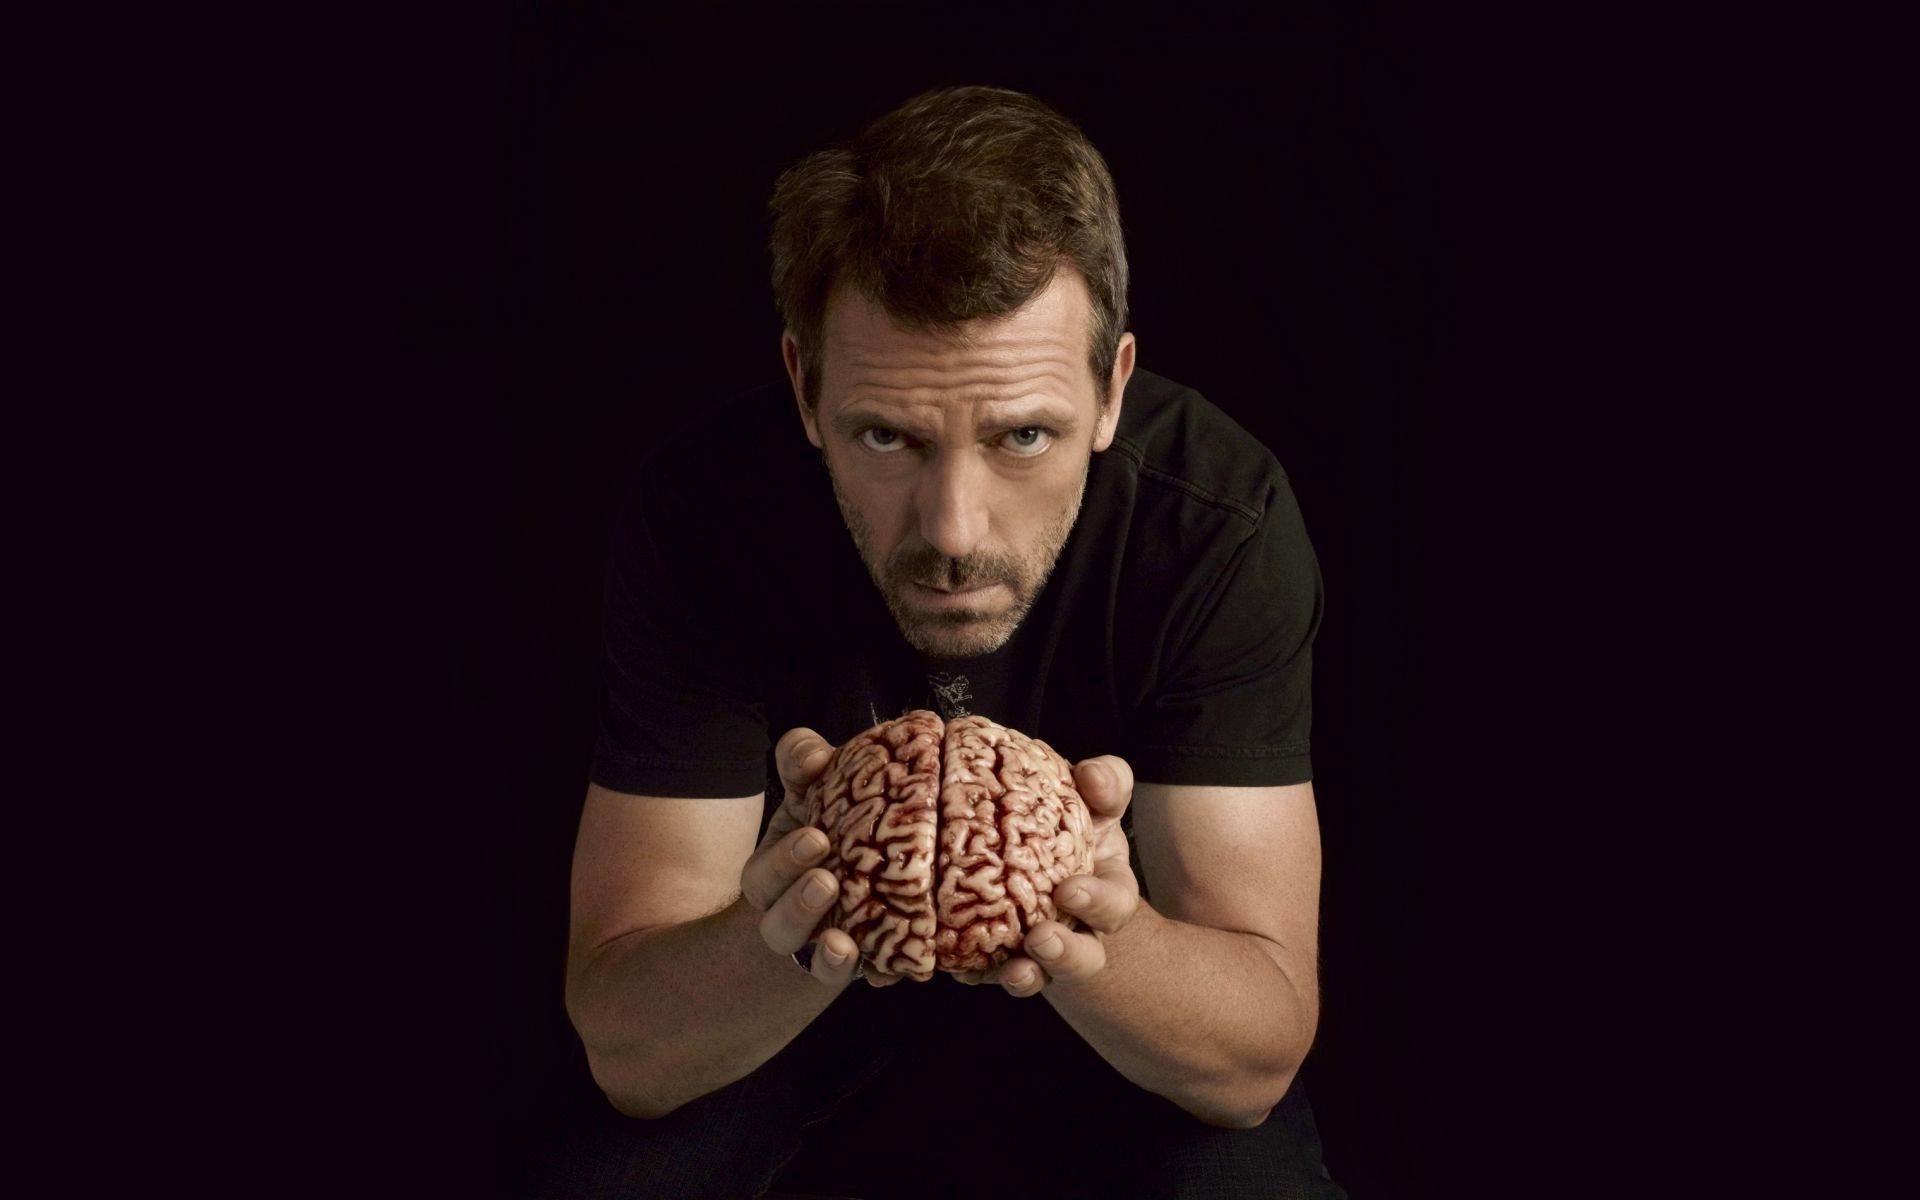 Tv Series One Man Dark Adult - Dr House With A Brain - HD Wallpaper 